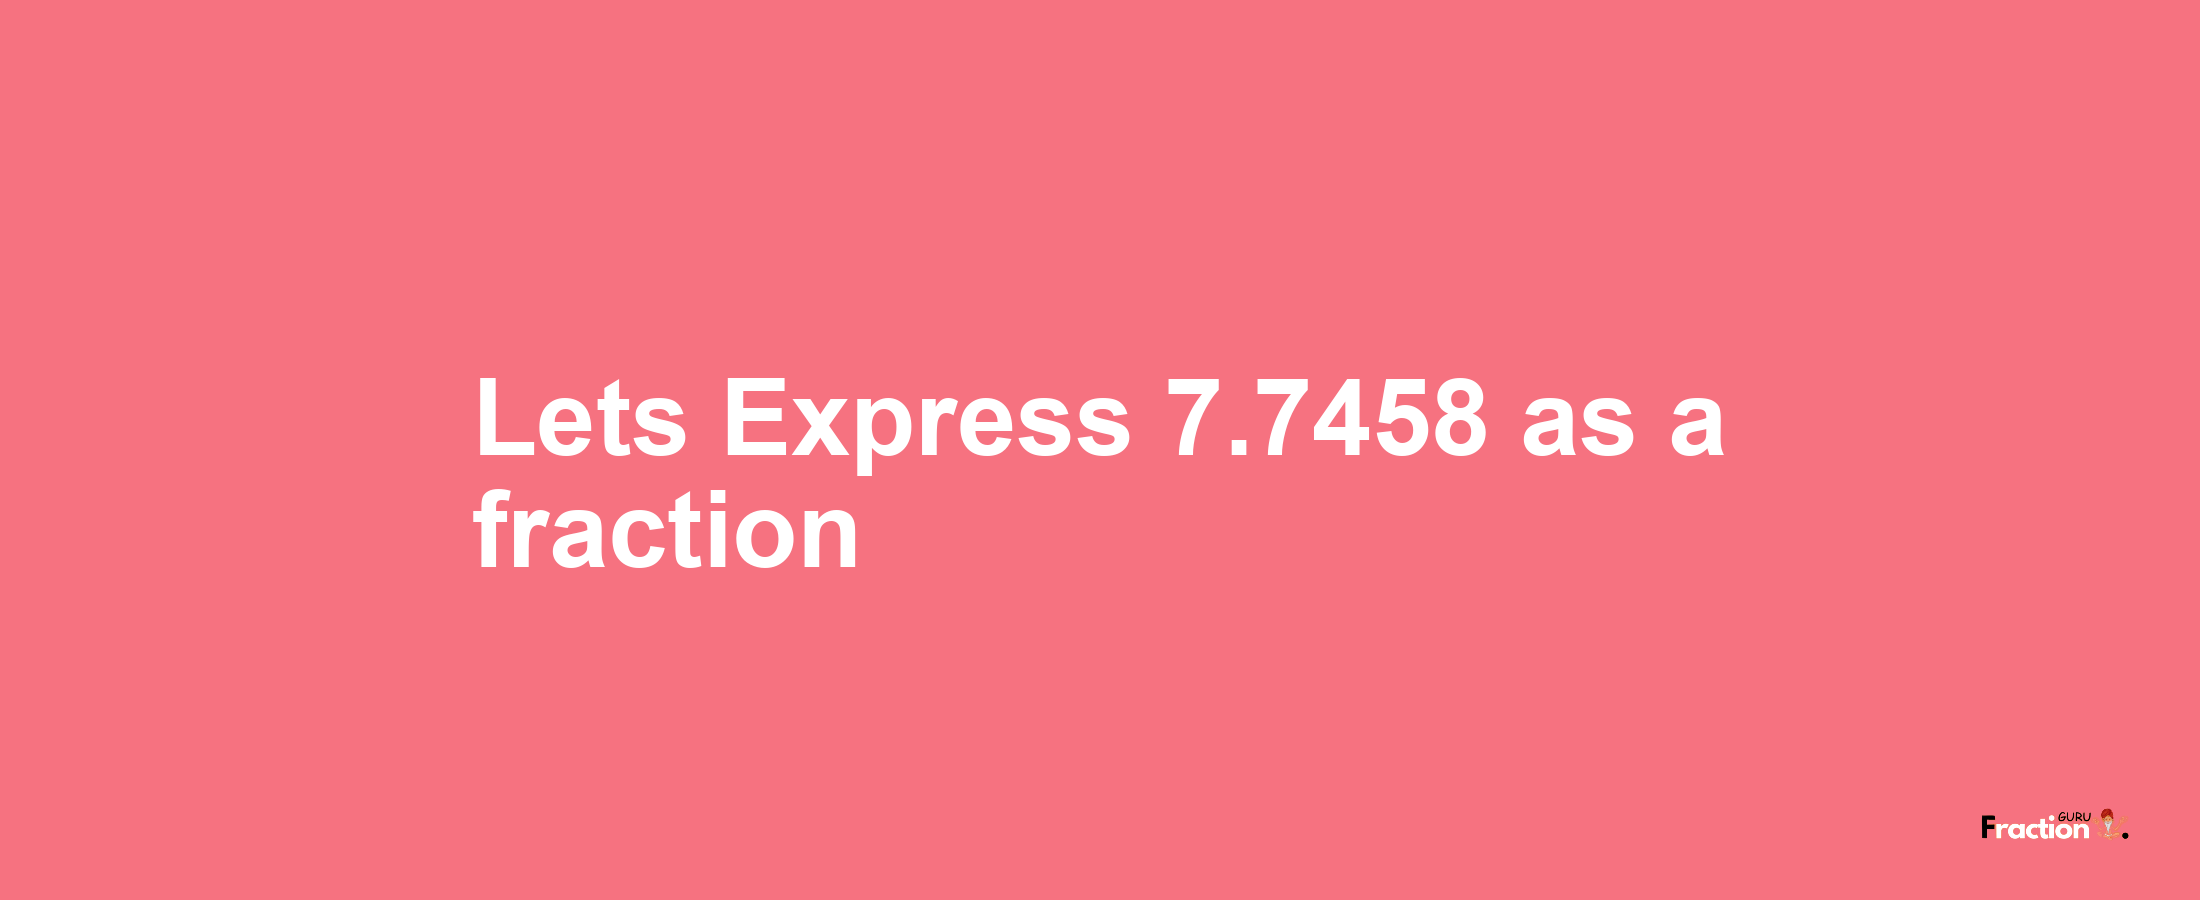 Lets Express 7.7458 as afraction